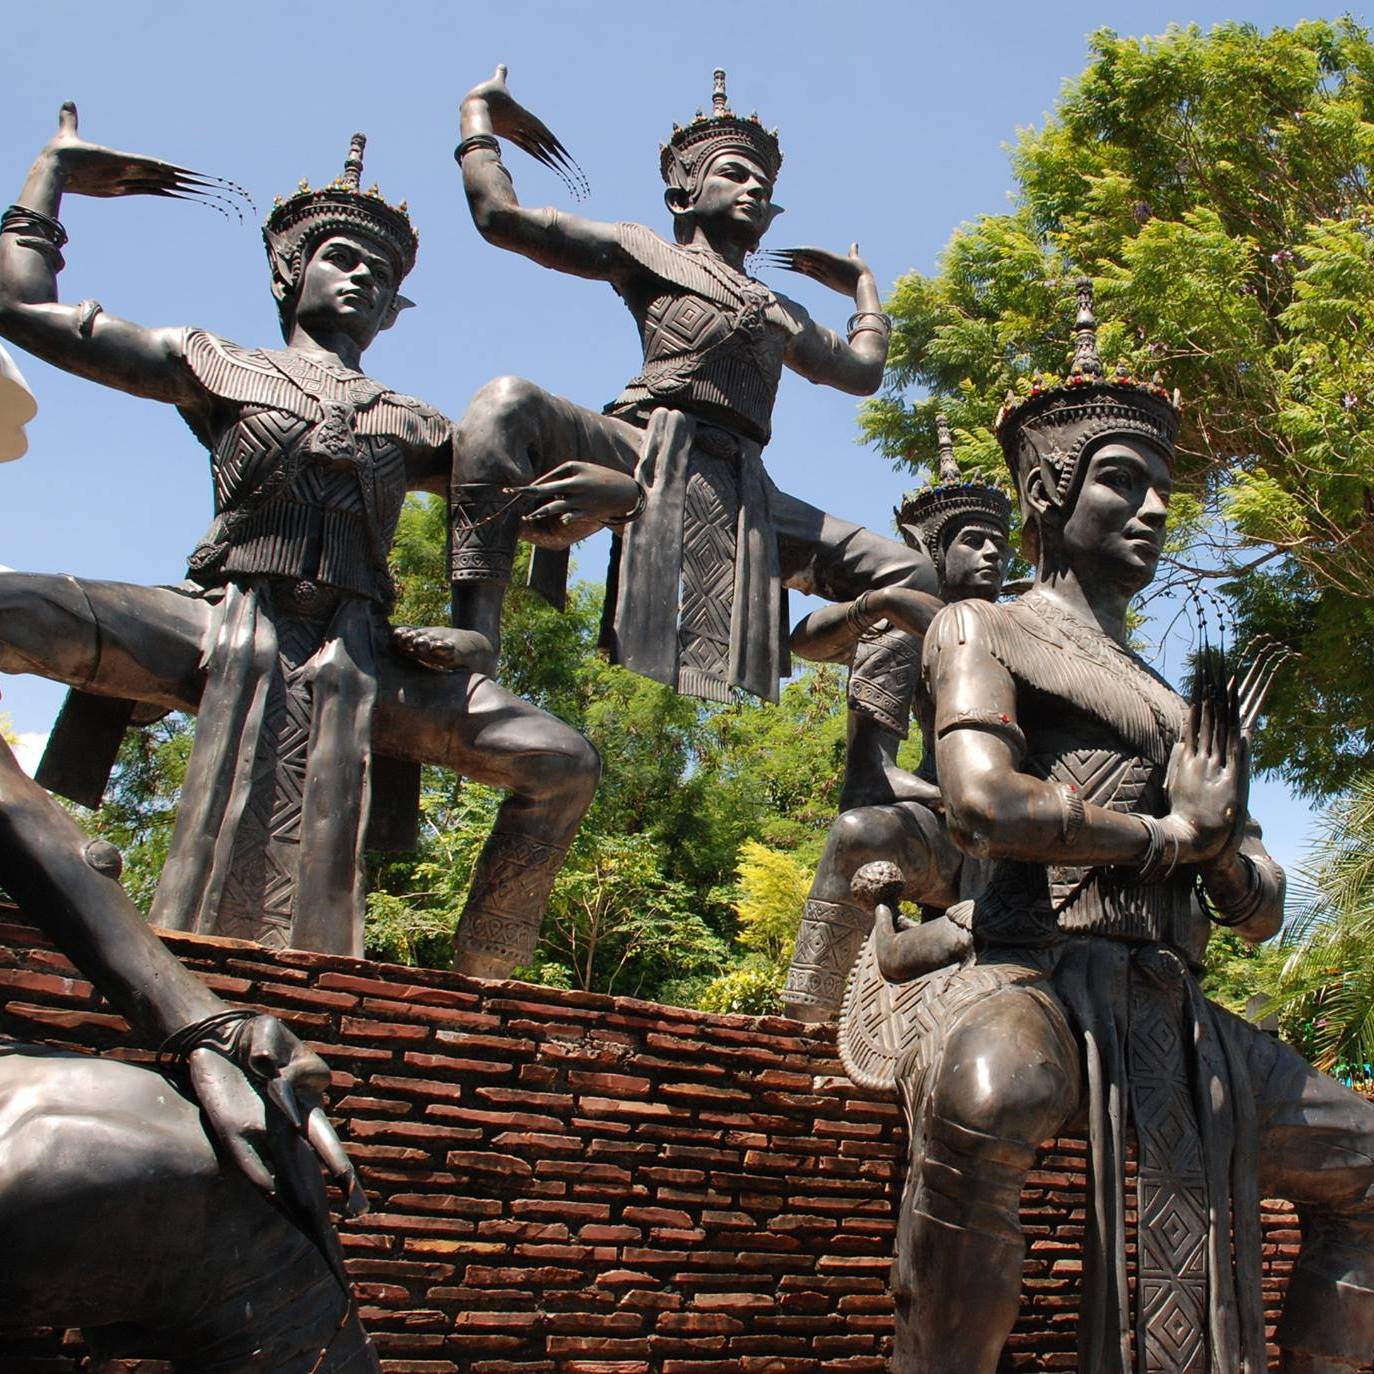 MUST SEE: Folklore Museum, Thaksin Institute of Education